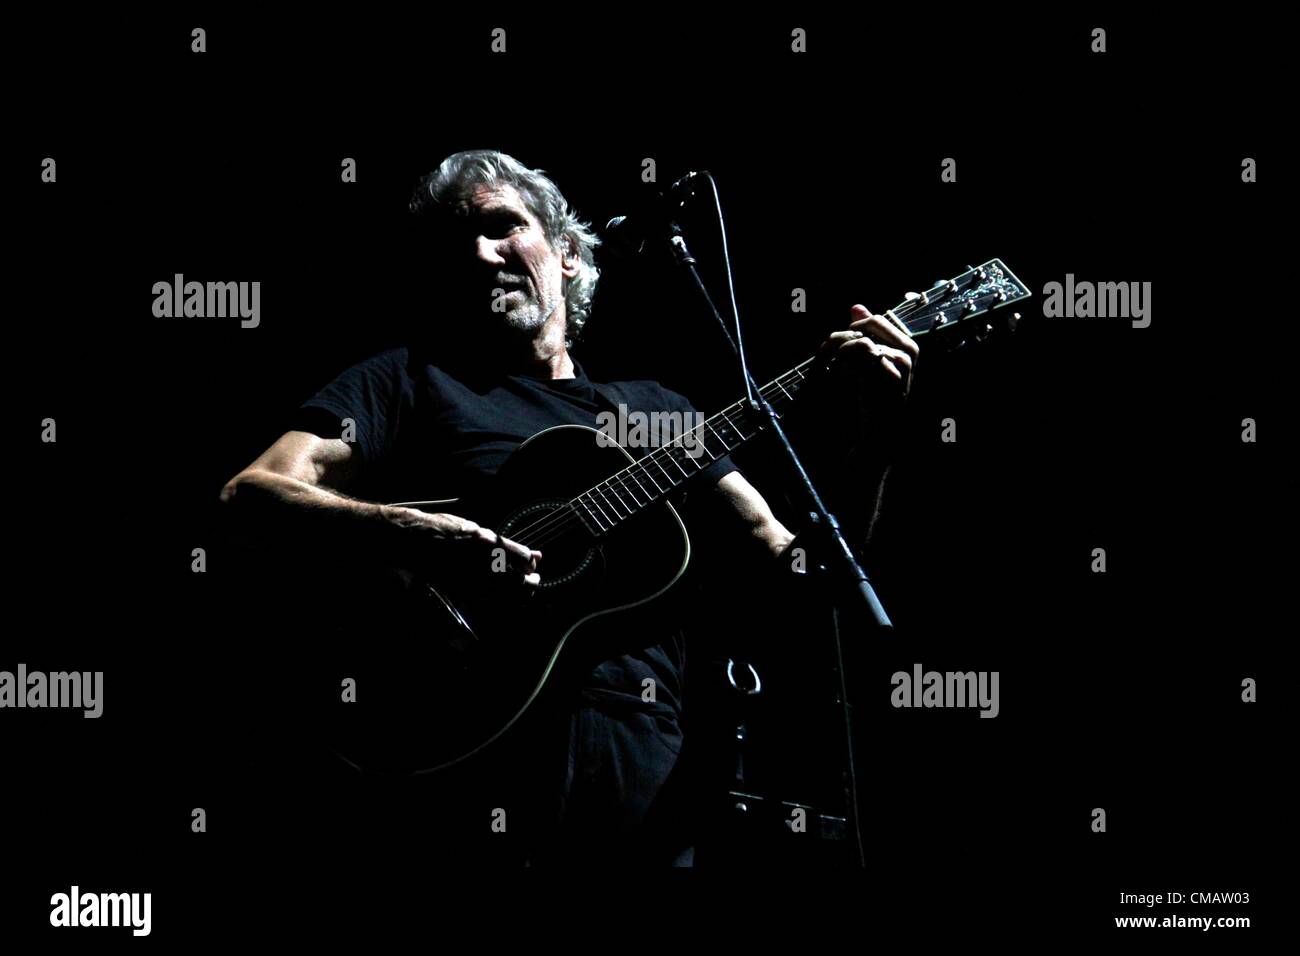 Roger Waters on stage for Roger Waters THE WALL LIVE Concert Tour, Yankee Stadium, New York, NY July 6, 2012. Photo By: F. Burton Patrick/Everett Collection Stock Photo